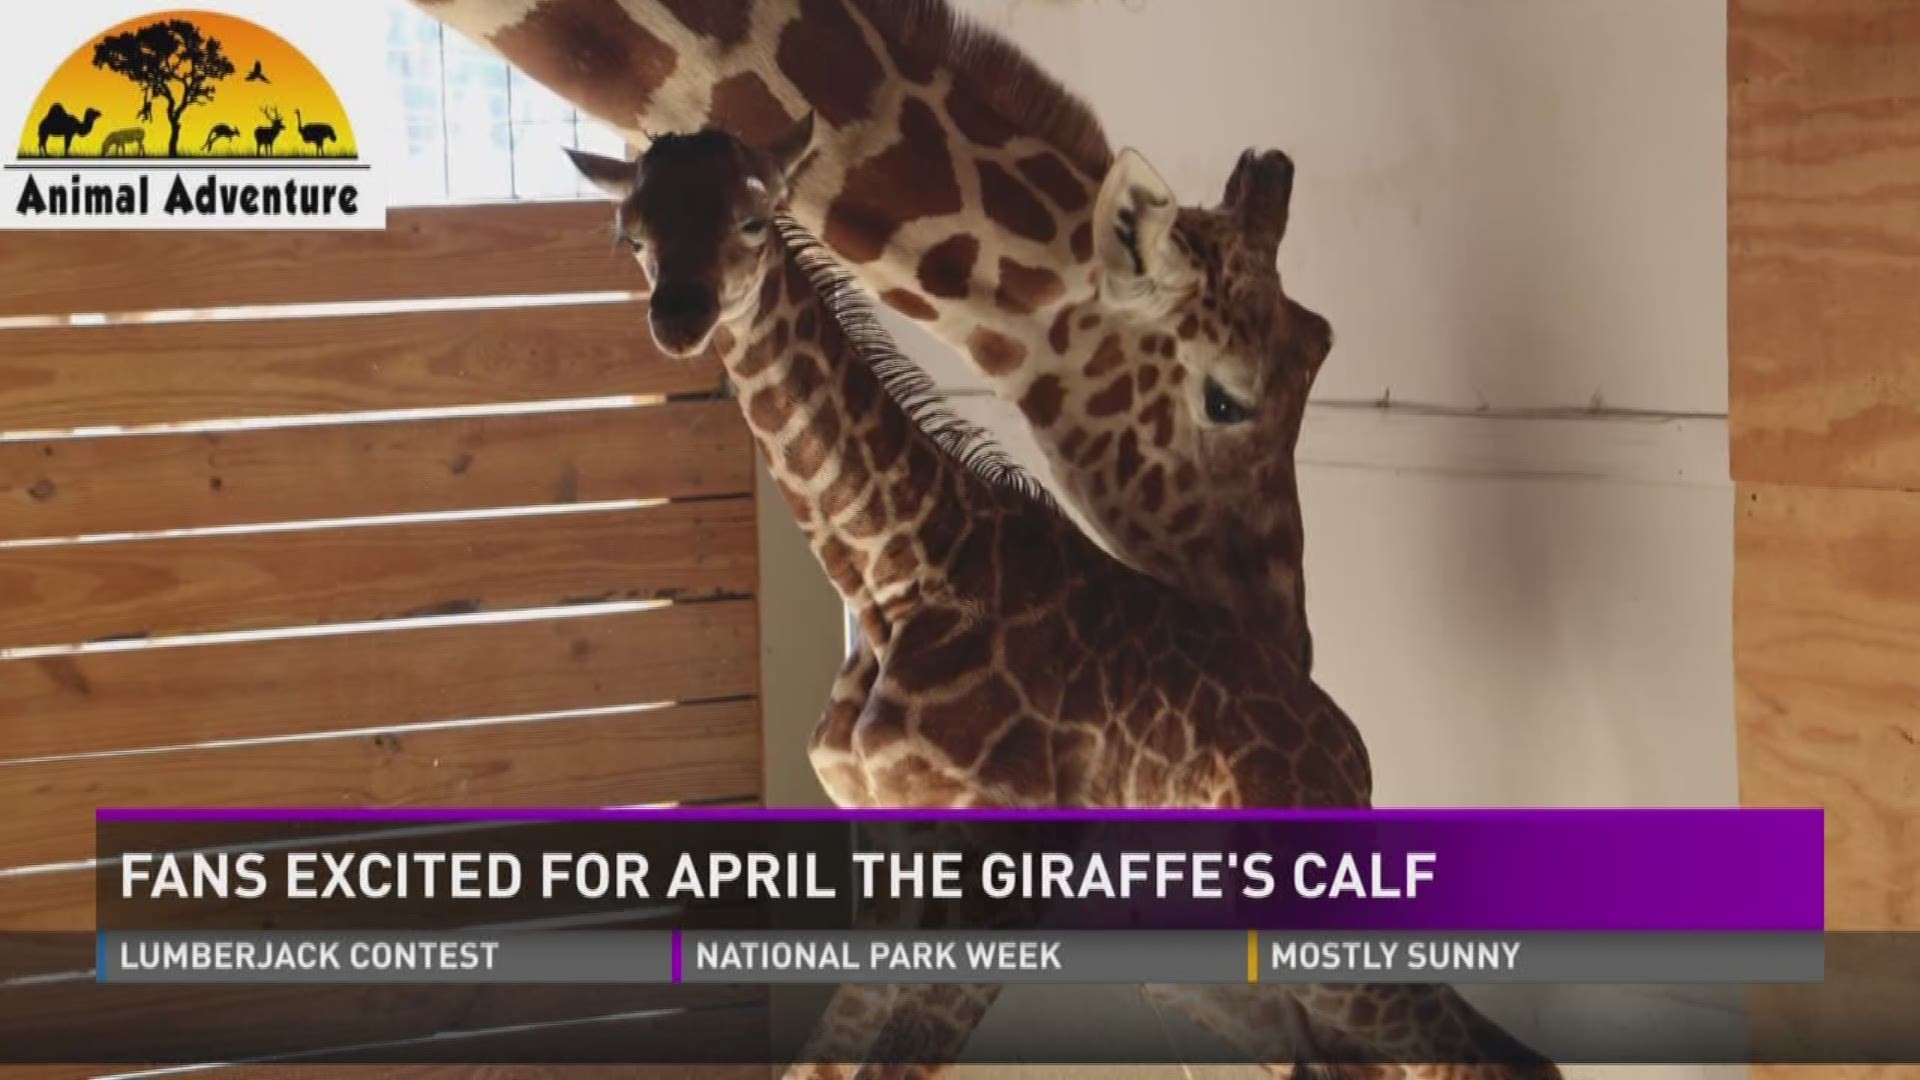 Animal Adventure Park said 1.2 million people watched April give birth Saturday morning on their YouTube live stream.